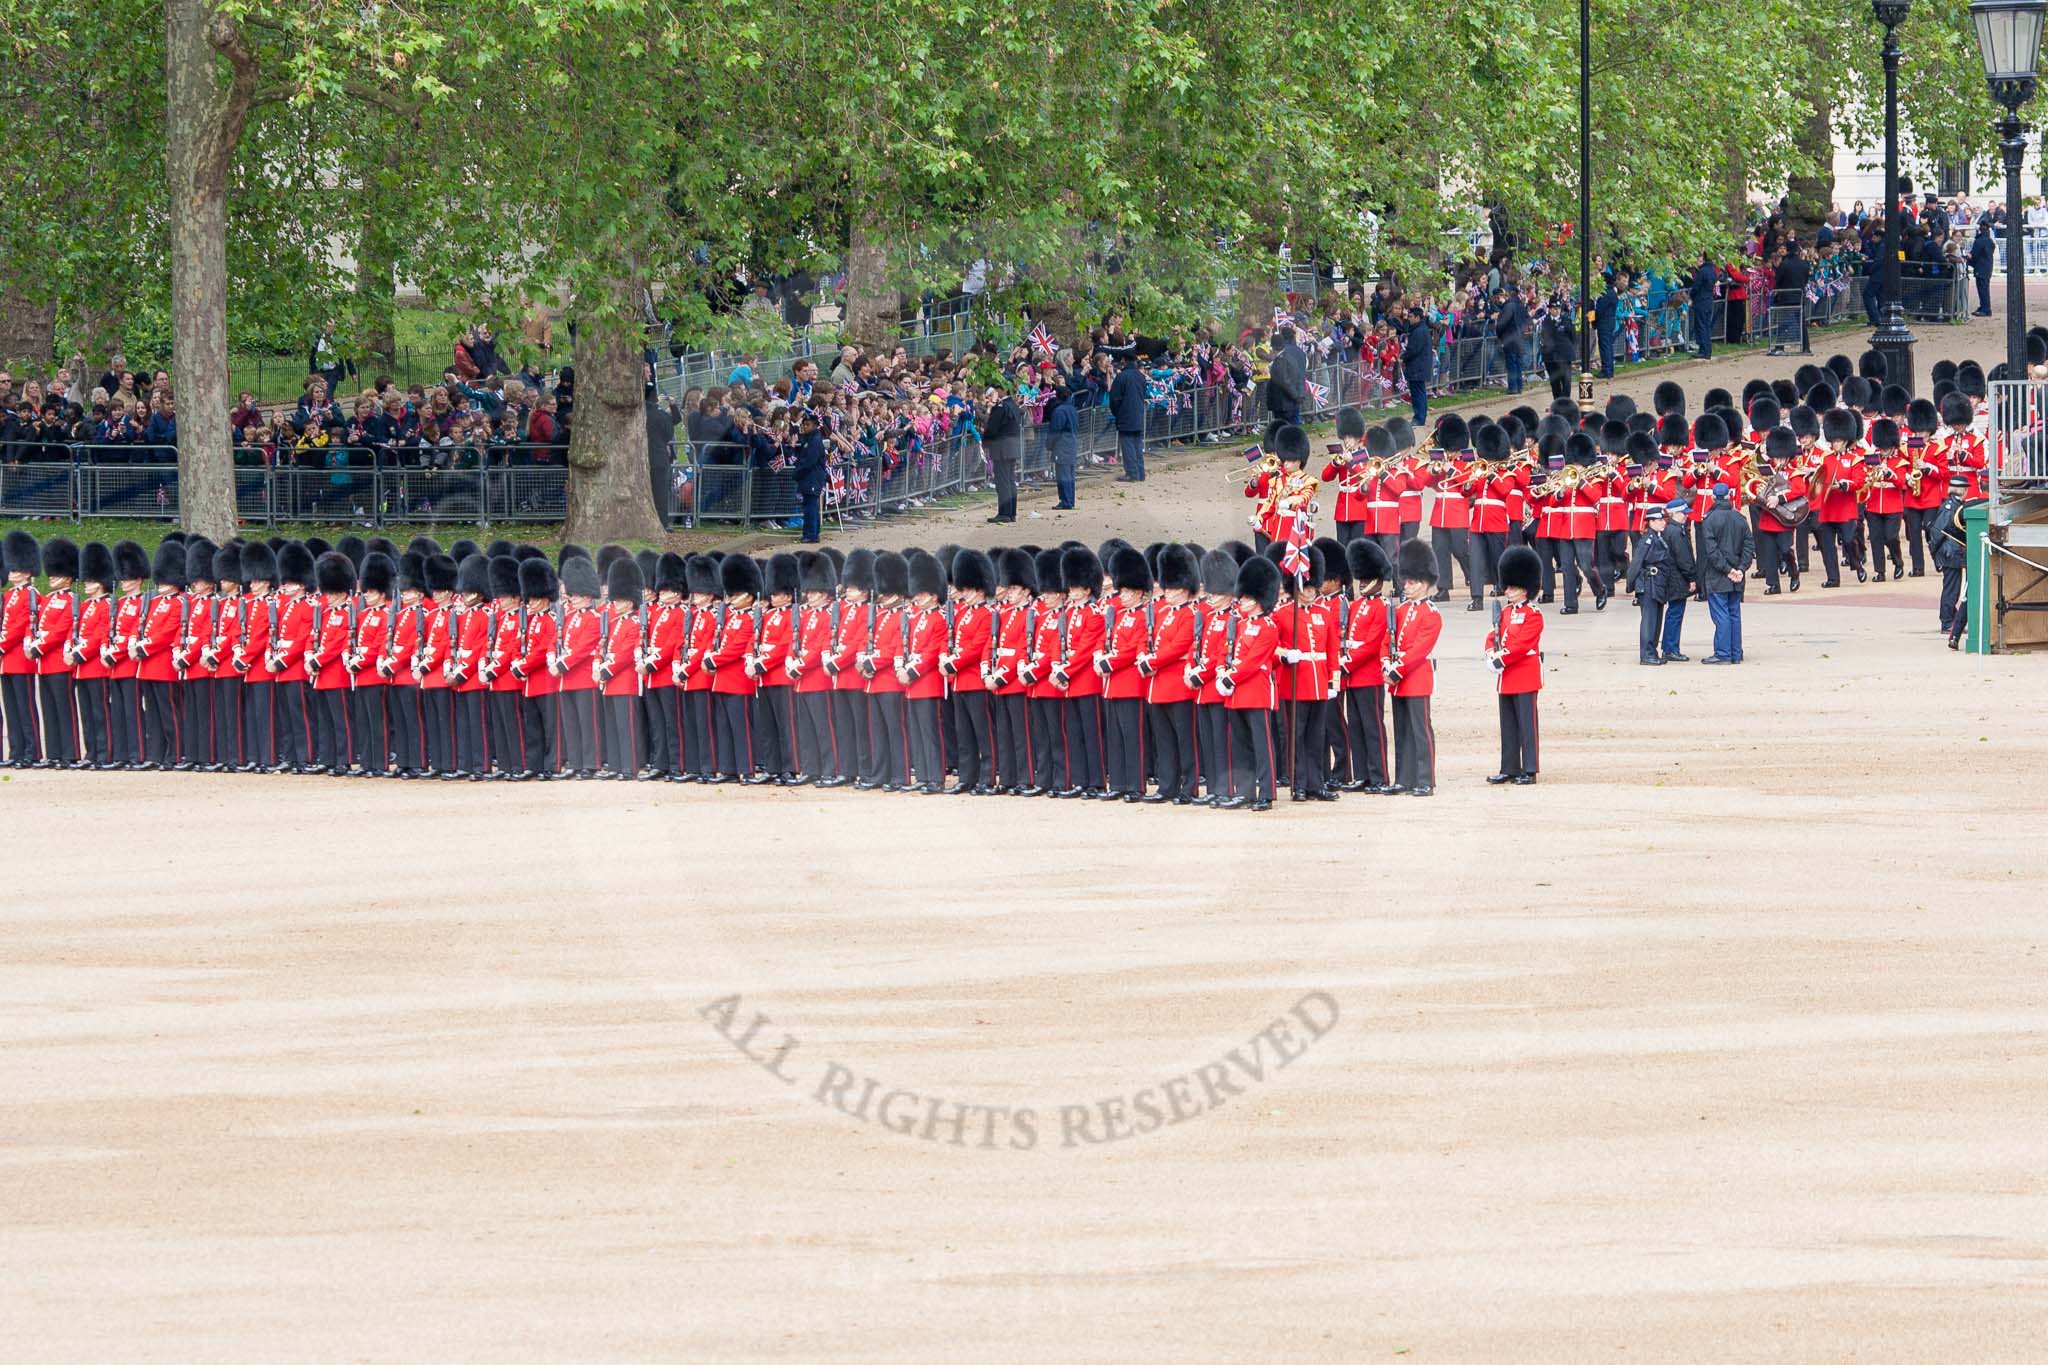 The Colonel's Review 2012: No. 6 guard in place at Horse Guards Parade, the Band of the Coldstream Guards just arriving from the Mall..
Horse Guards Parade, Westminster,
London SW1,

United Kingdom,
on 09 June 2012 at 10:28, image #70